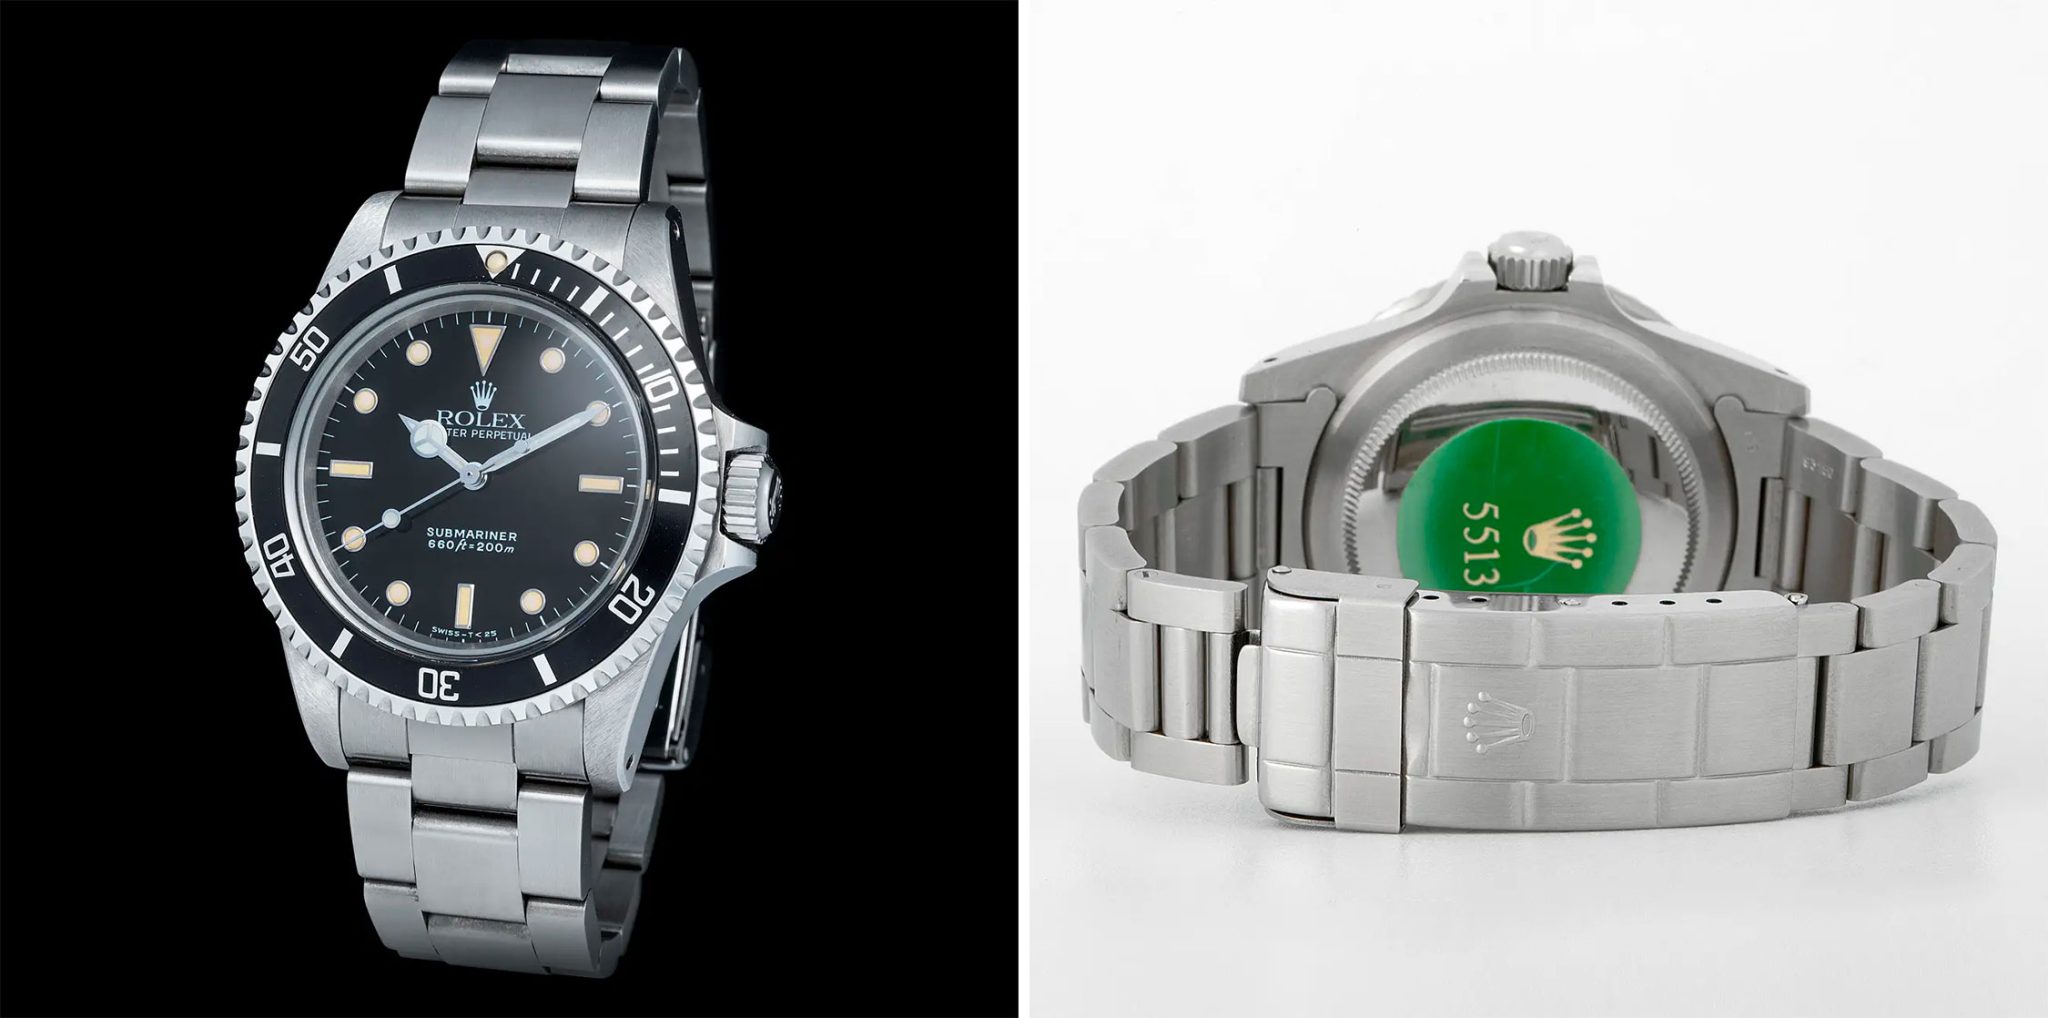 Rolex-Submariner-Ref-5513-New-Old-Stock-MLG-Exclusive-Timepieces-Auktion-2023-April-Lot-104